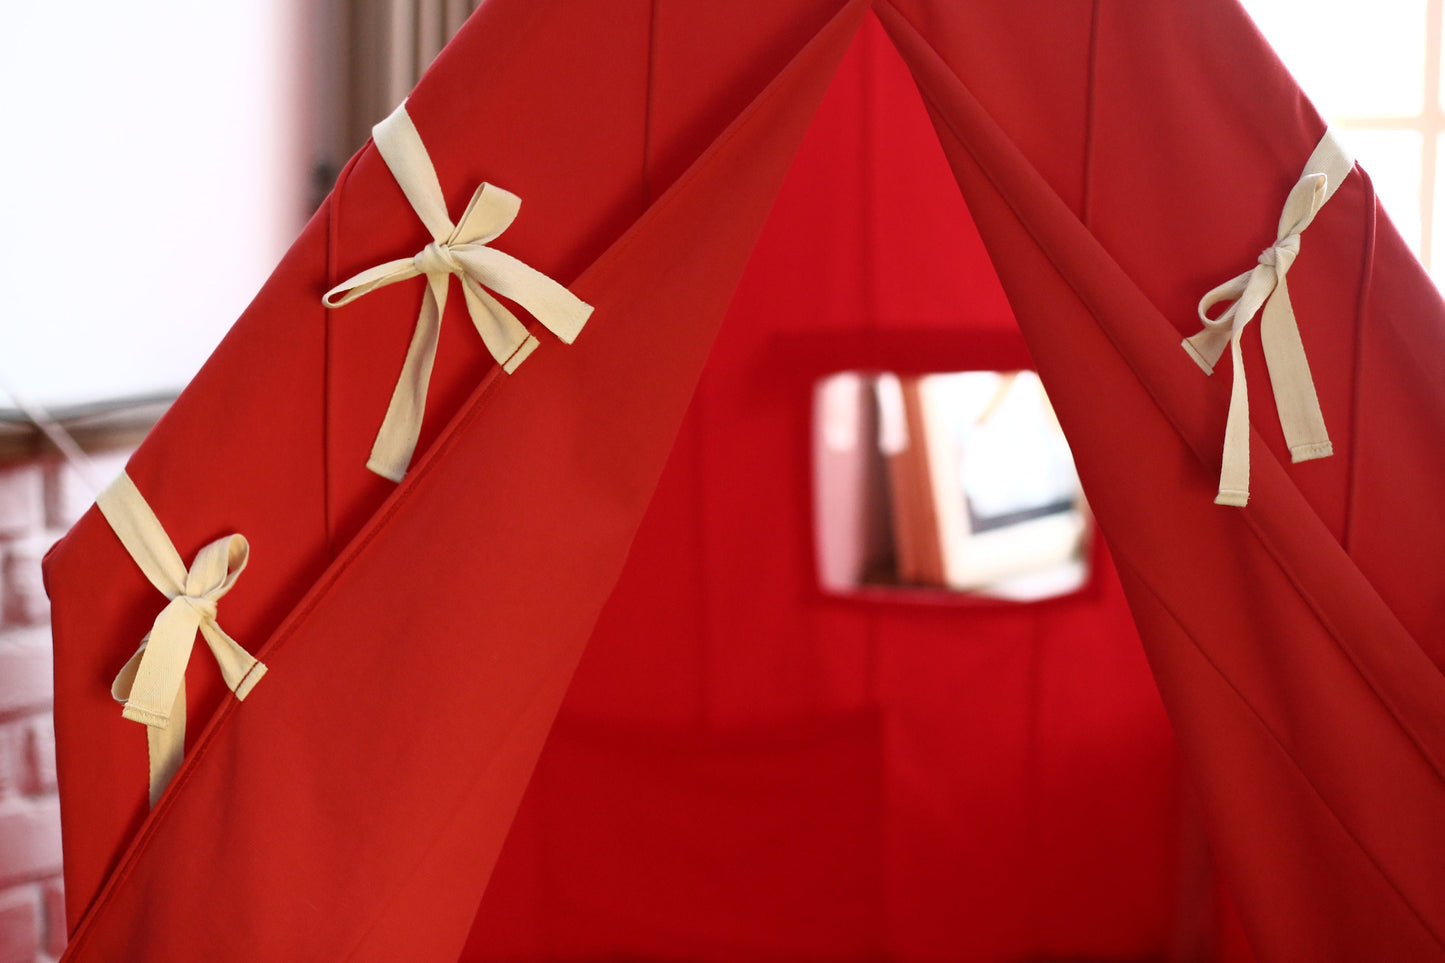 Girls canopy tent - red cotton indoor canopy for Princess. Best first birthday gift for girls.Safe, eco-friendly, good as mini doll house